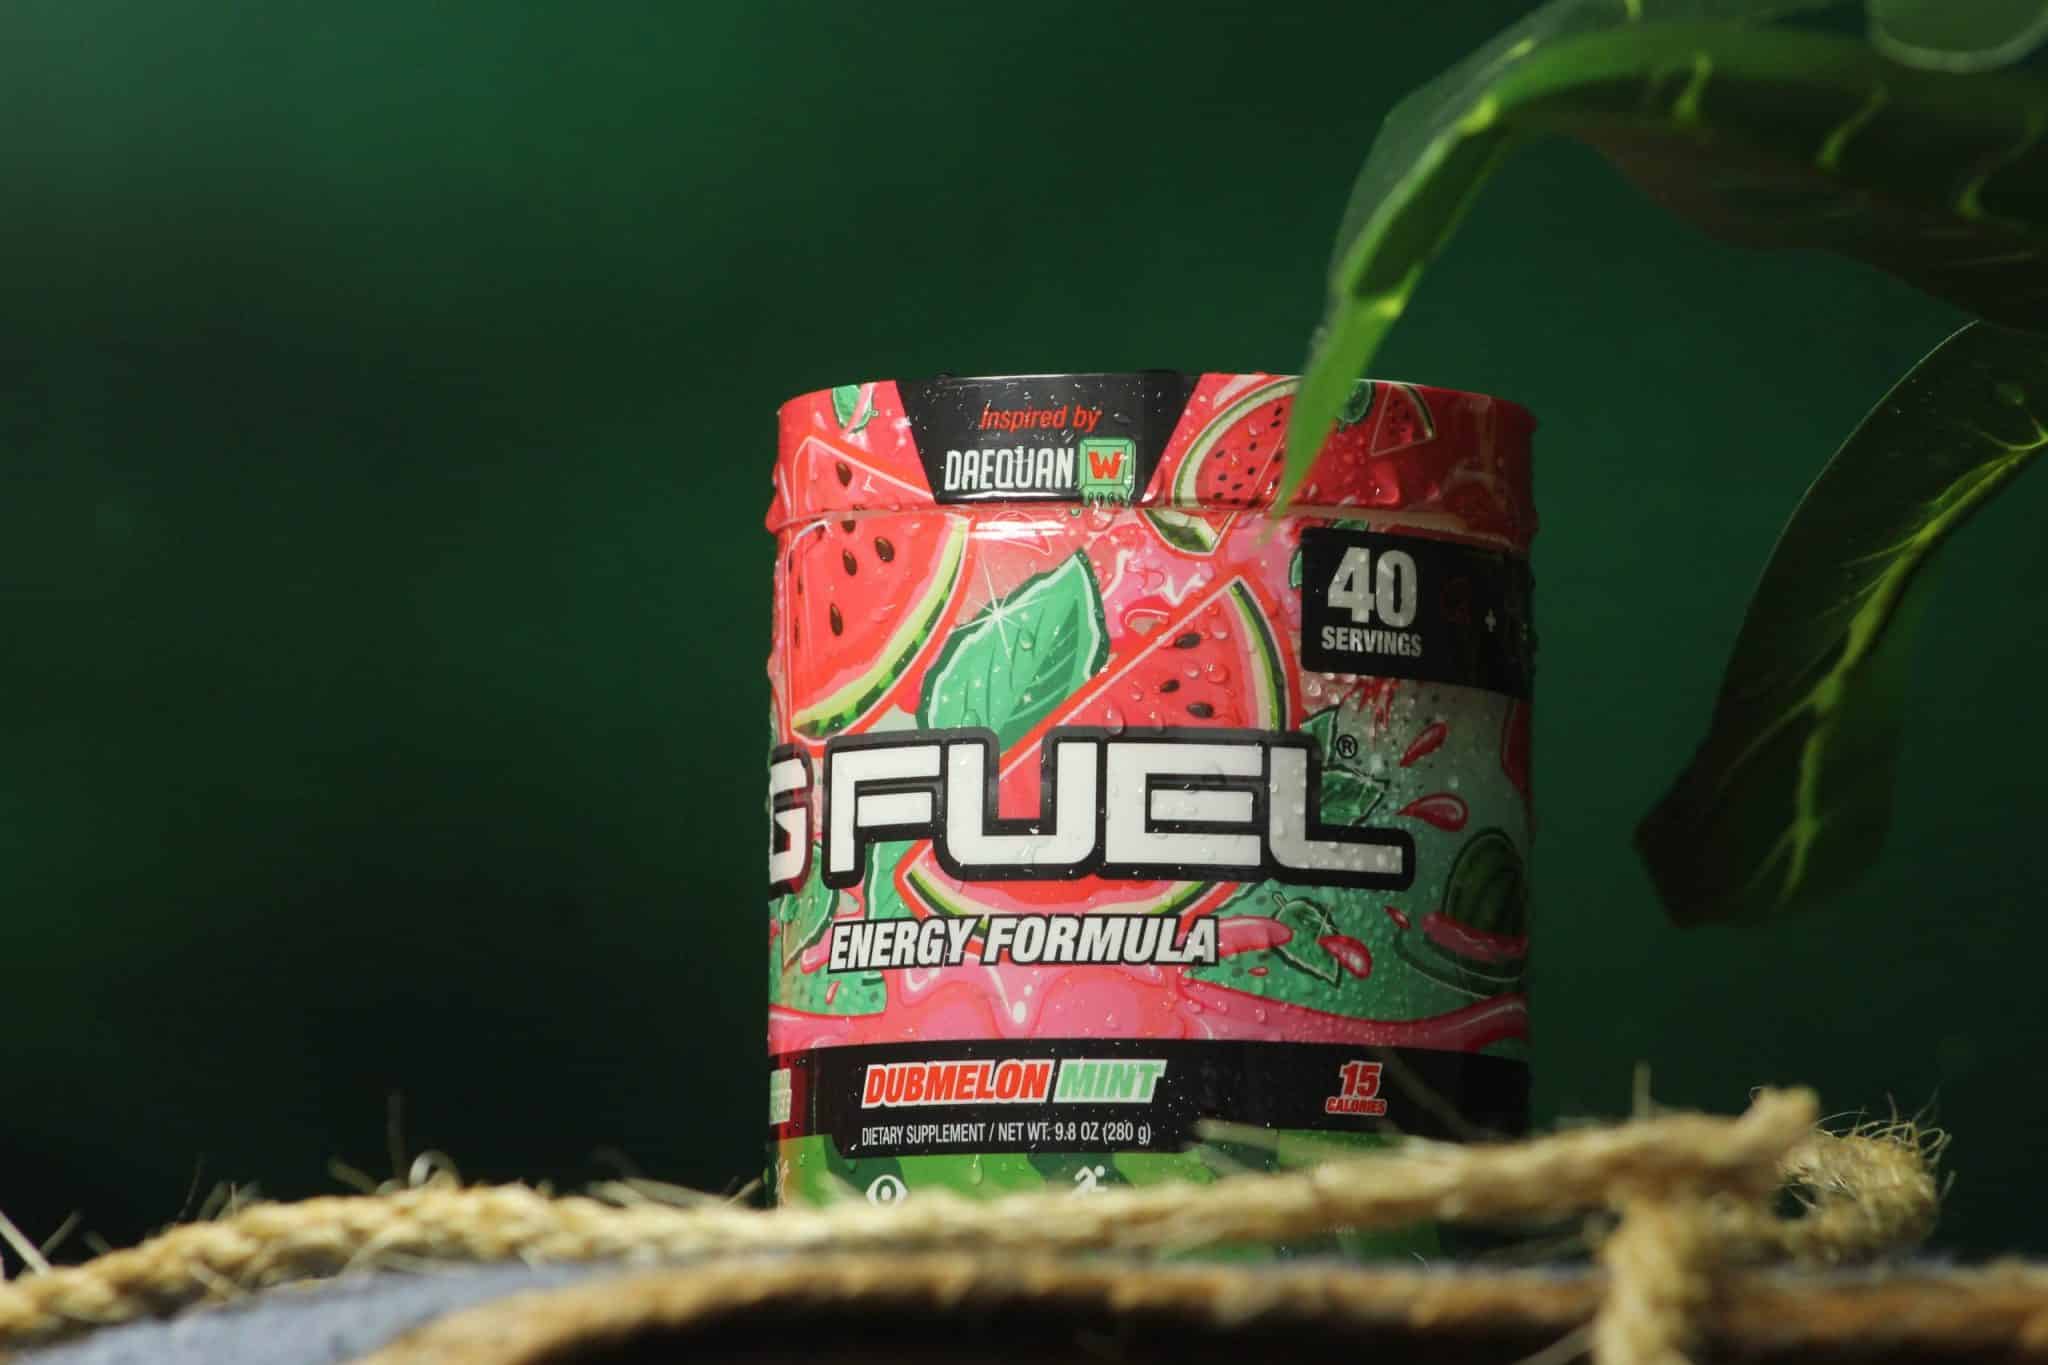 How To Get G Fuel Orders Shipped To India